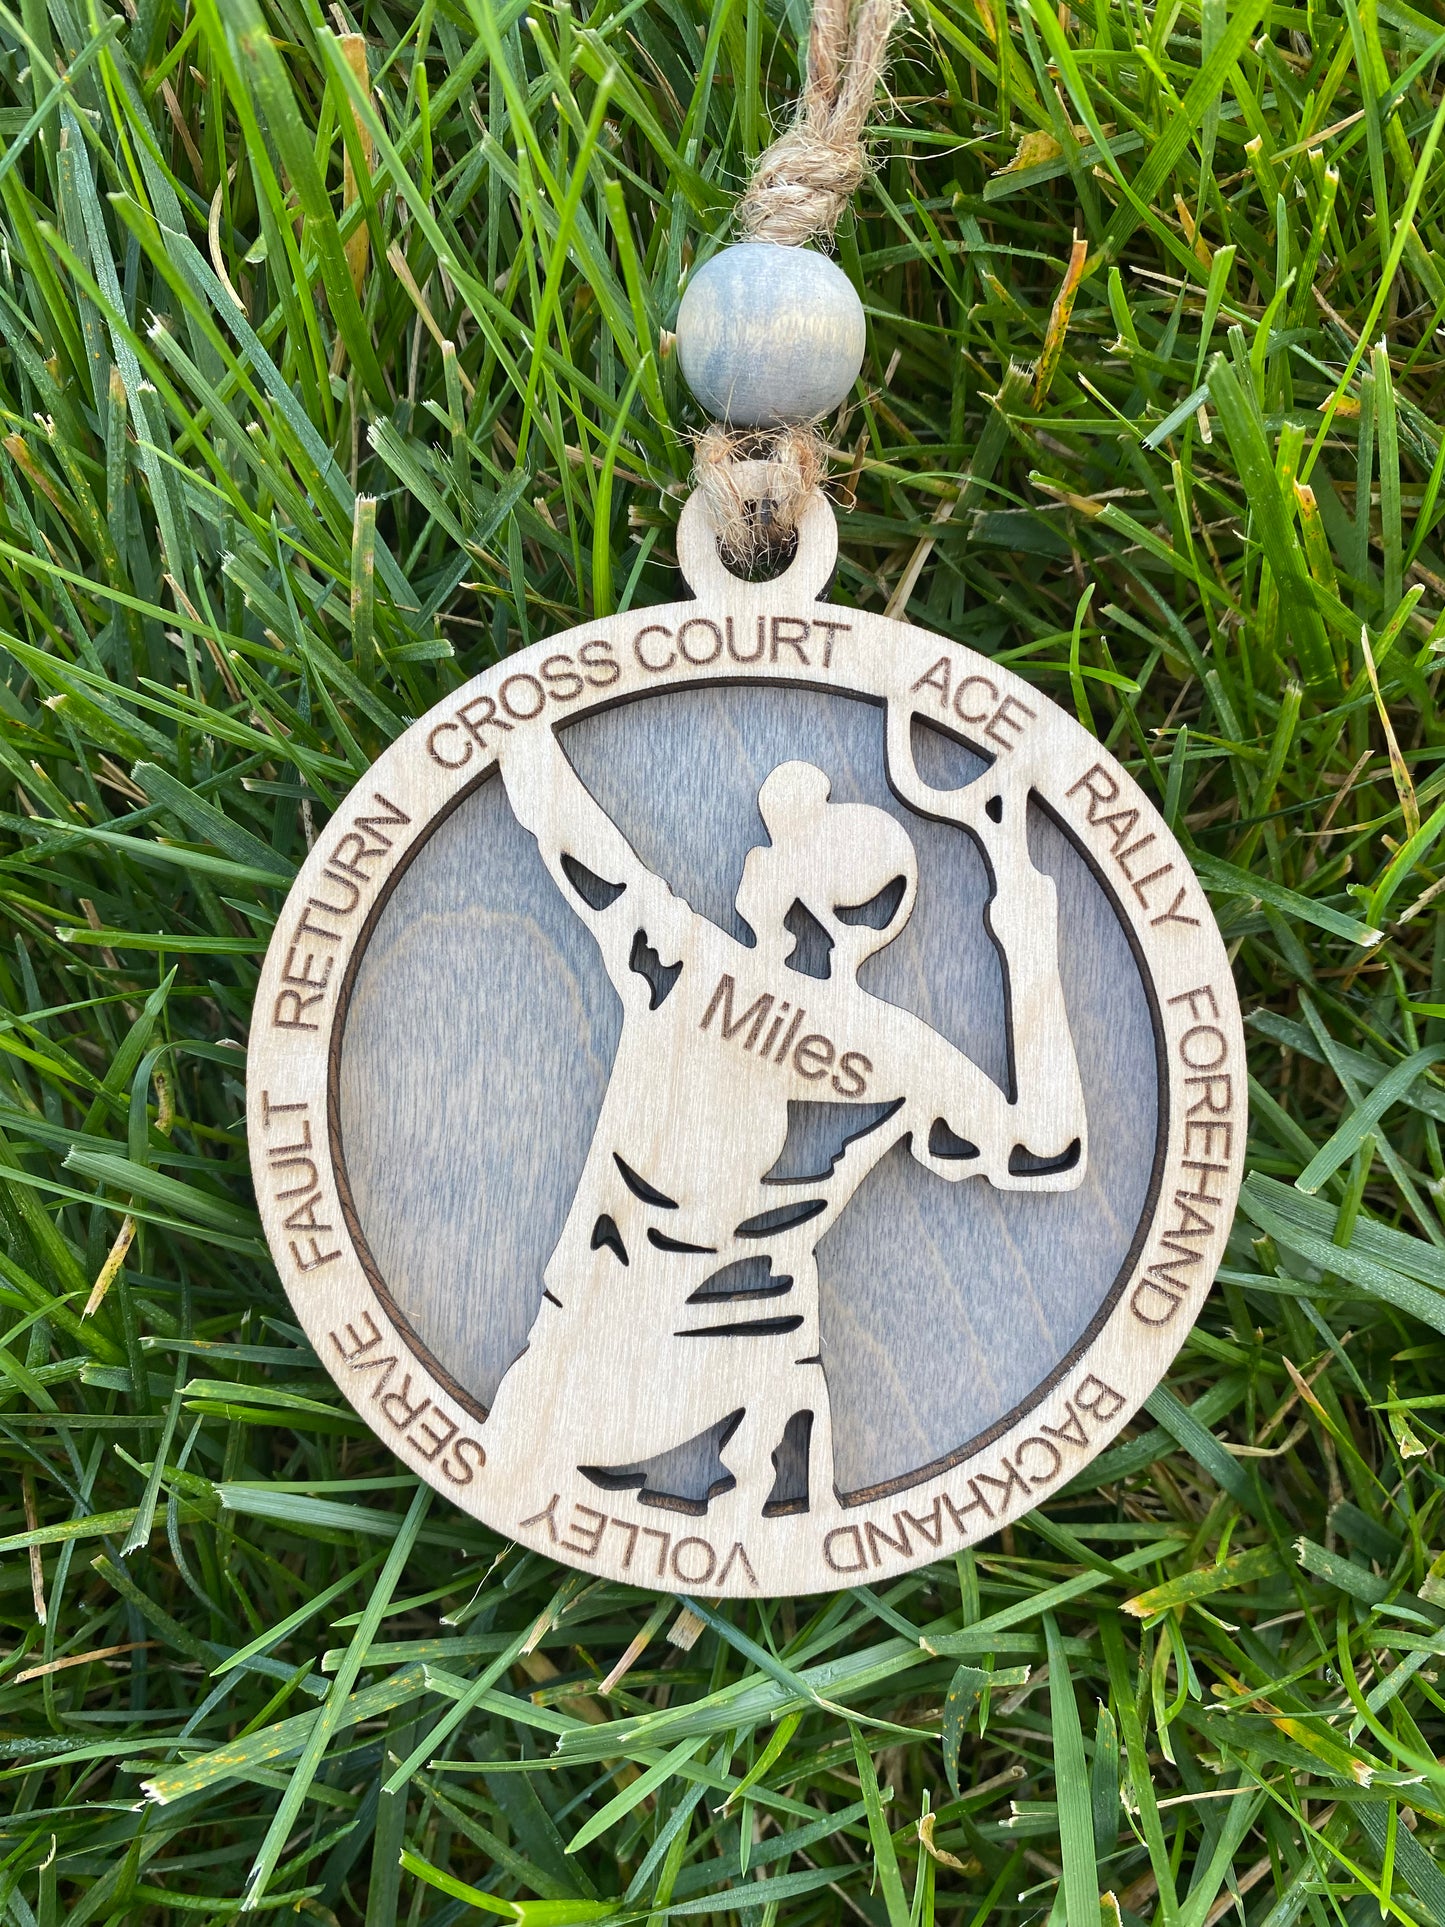 Personalized Tennis Christmas Ornament